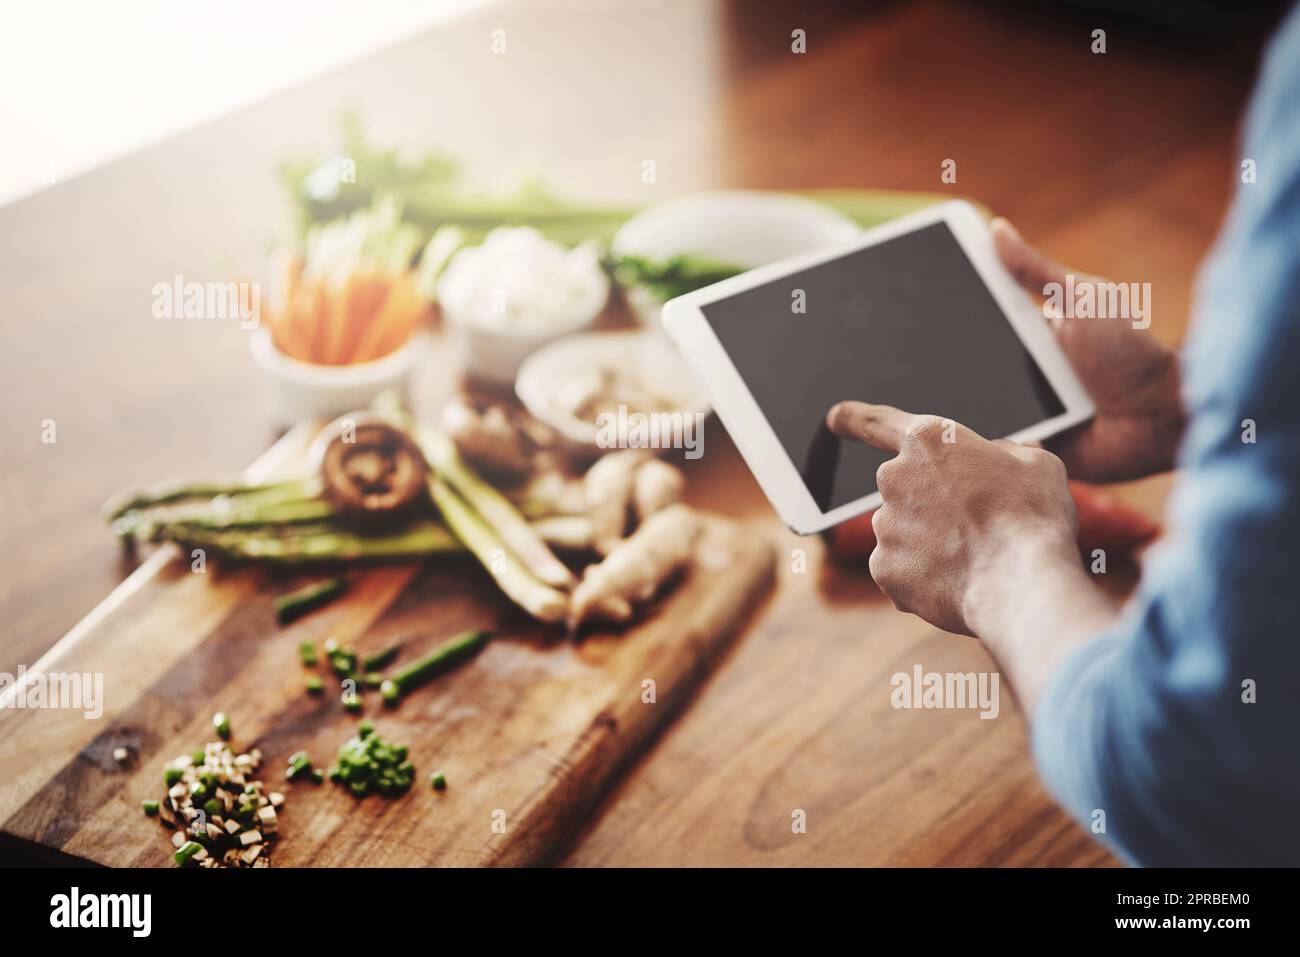 Closeup of hands of man holding a tablet to research healthy recipes, watch cooking tutorial videos and scrolling online for meal ideas while making dinner, lunch or breakfast. Man browsing on app Stock Photo